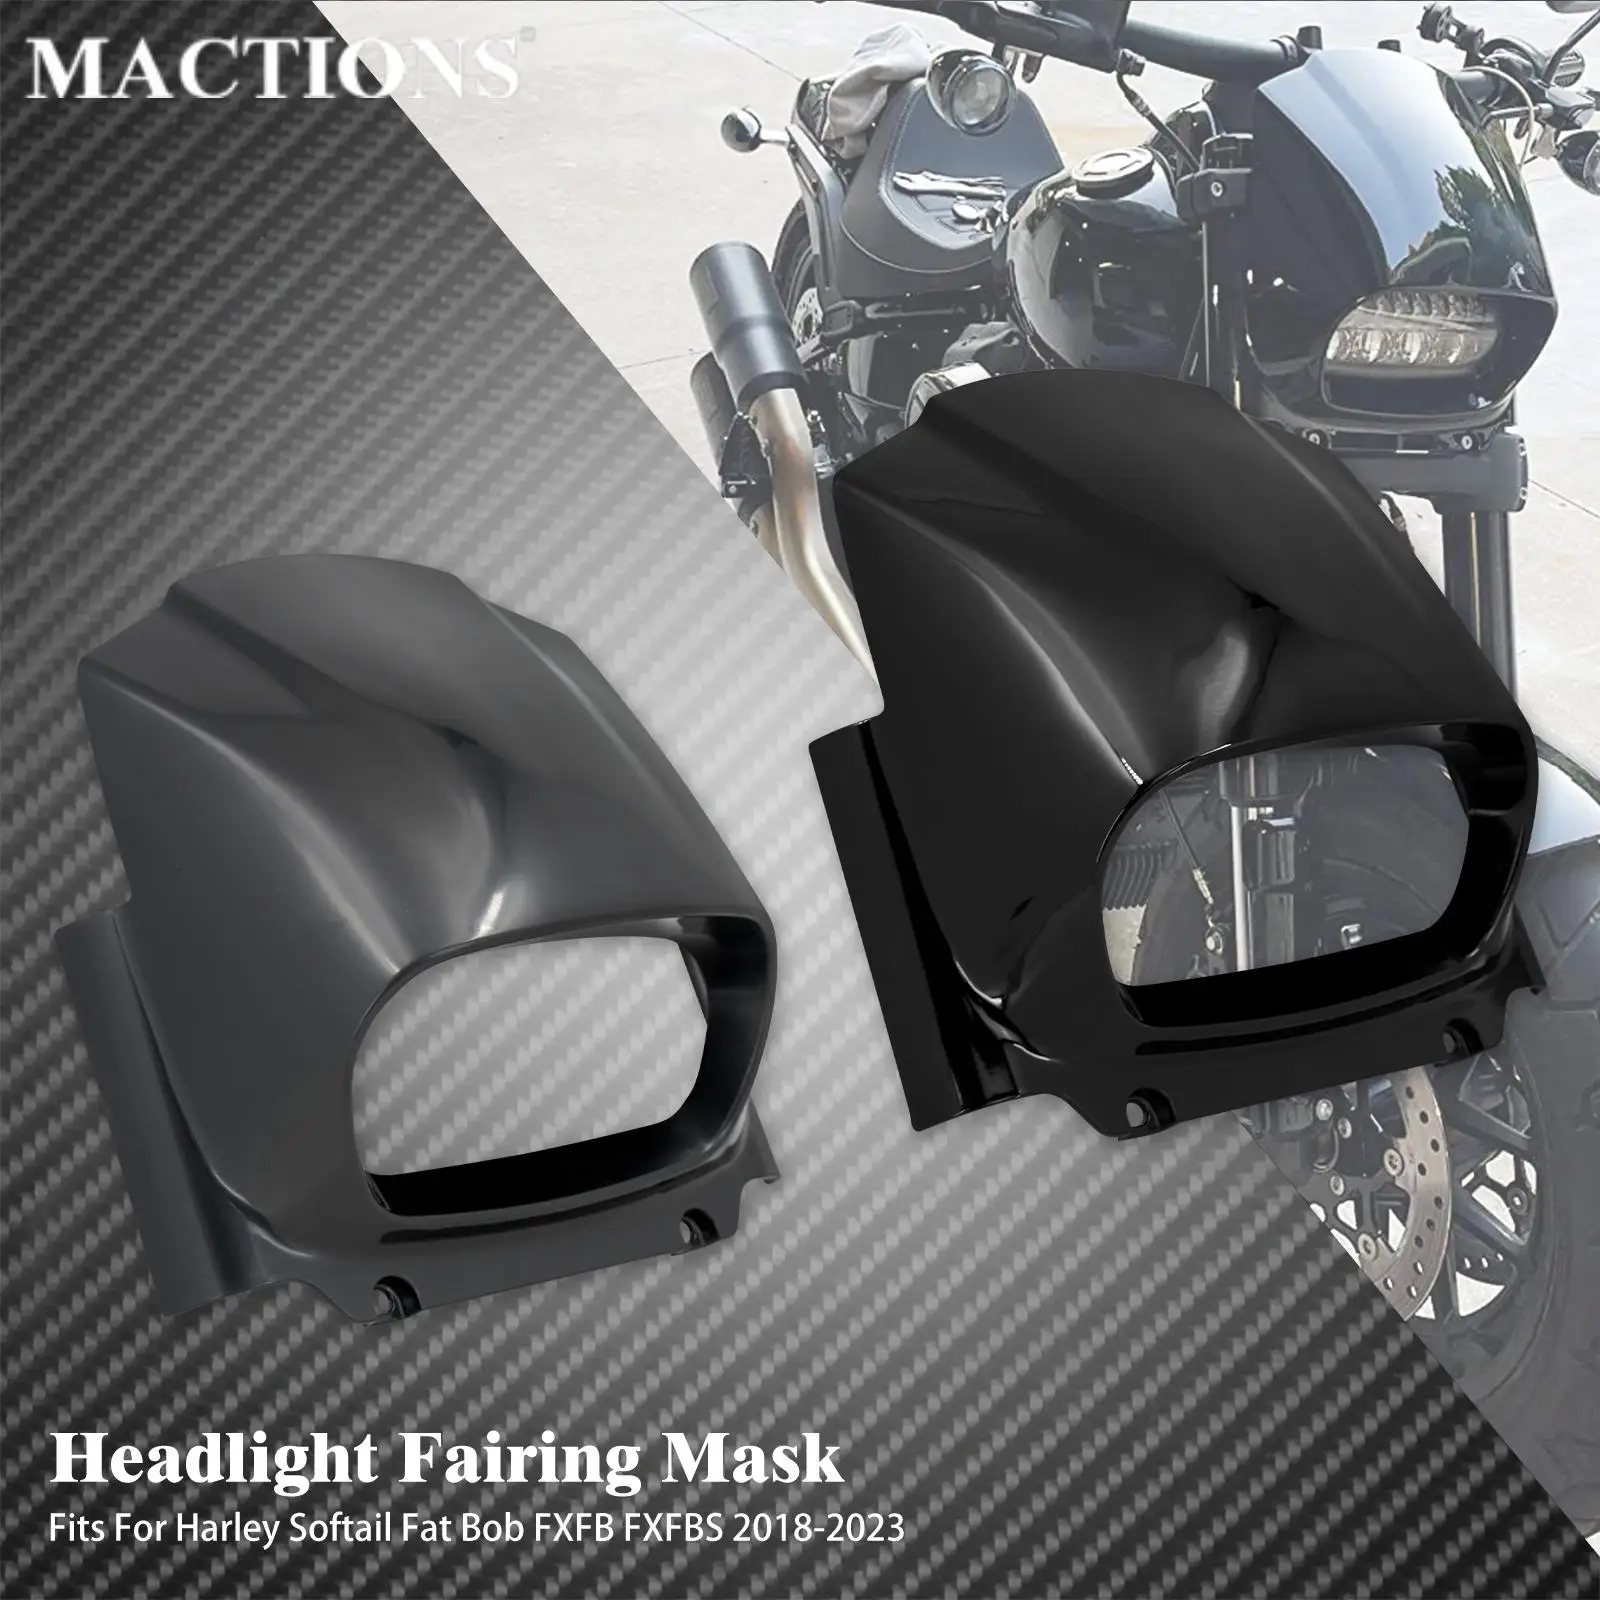 

Headlight Fairing Cover Black Motorcycle Front Headlamp Cowl Windscreen Cover M8 For Harley Softail Fat Bob FXFB FXFBS 2018-2023